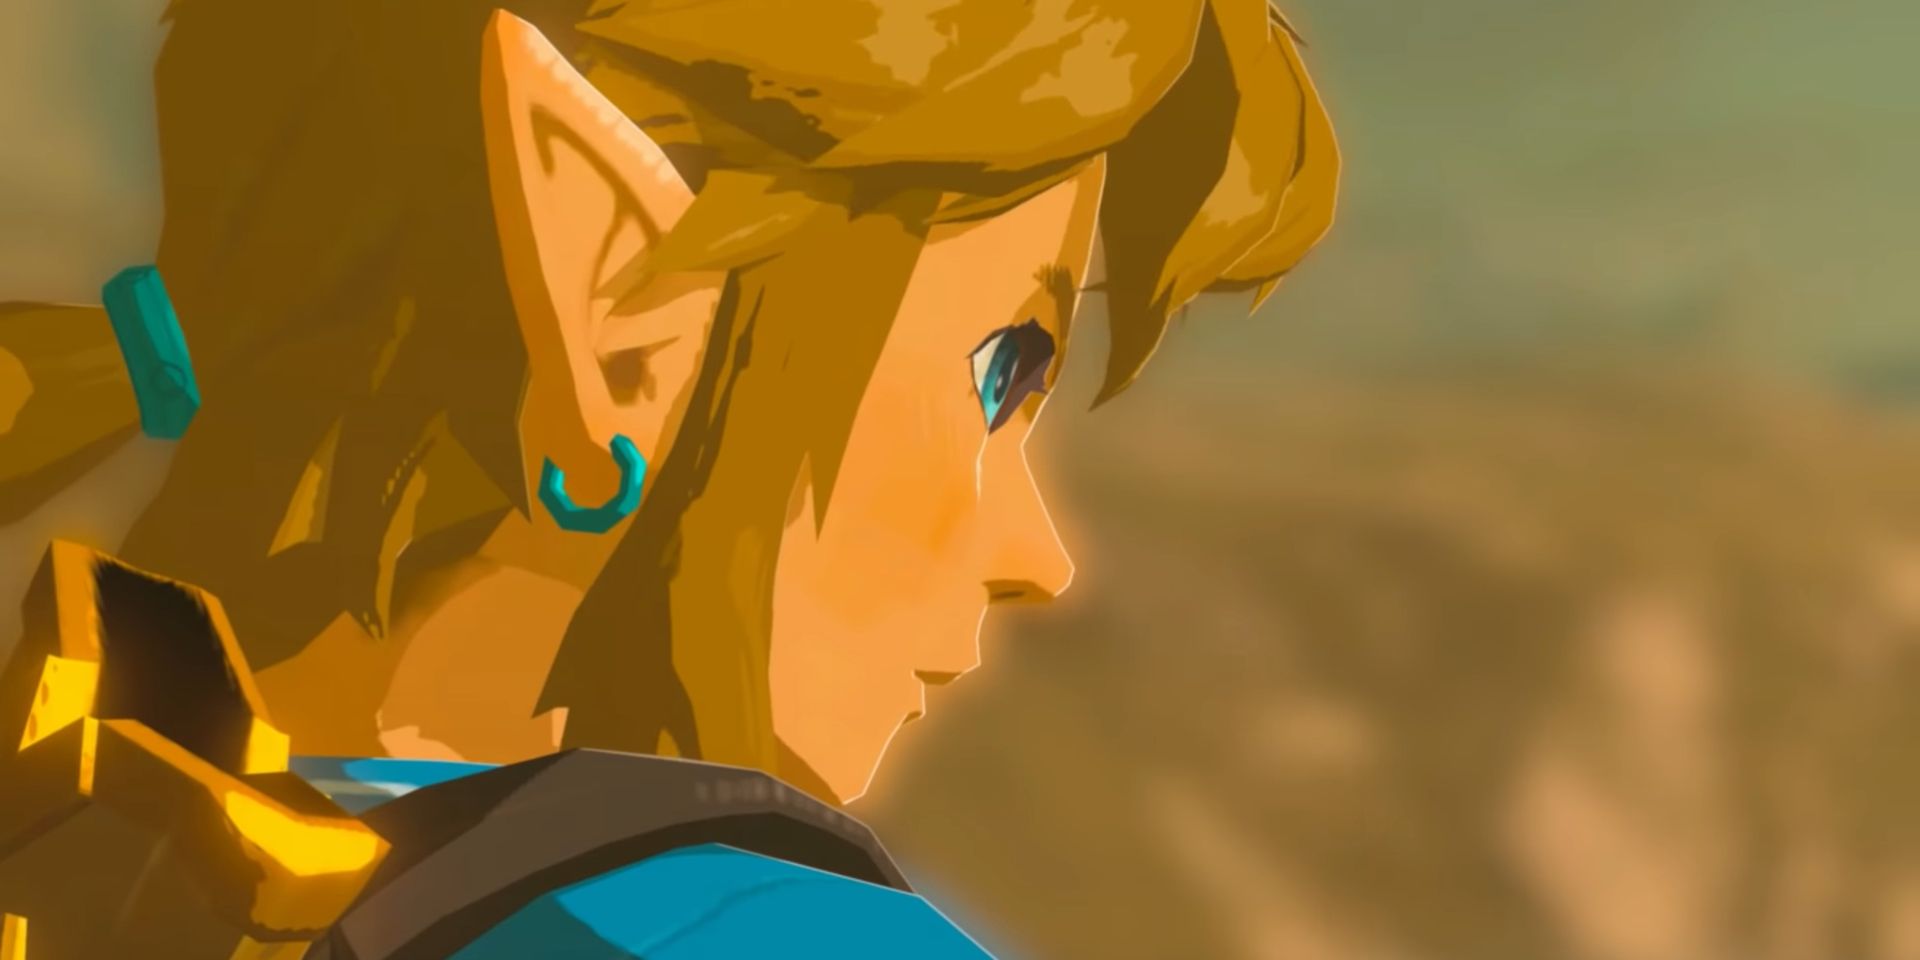 Breath of the Wild 2 Predicted To Be BestSelling Game In Franchise History